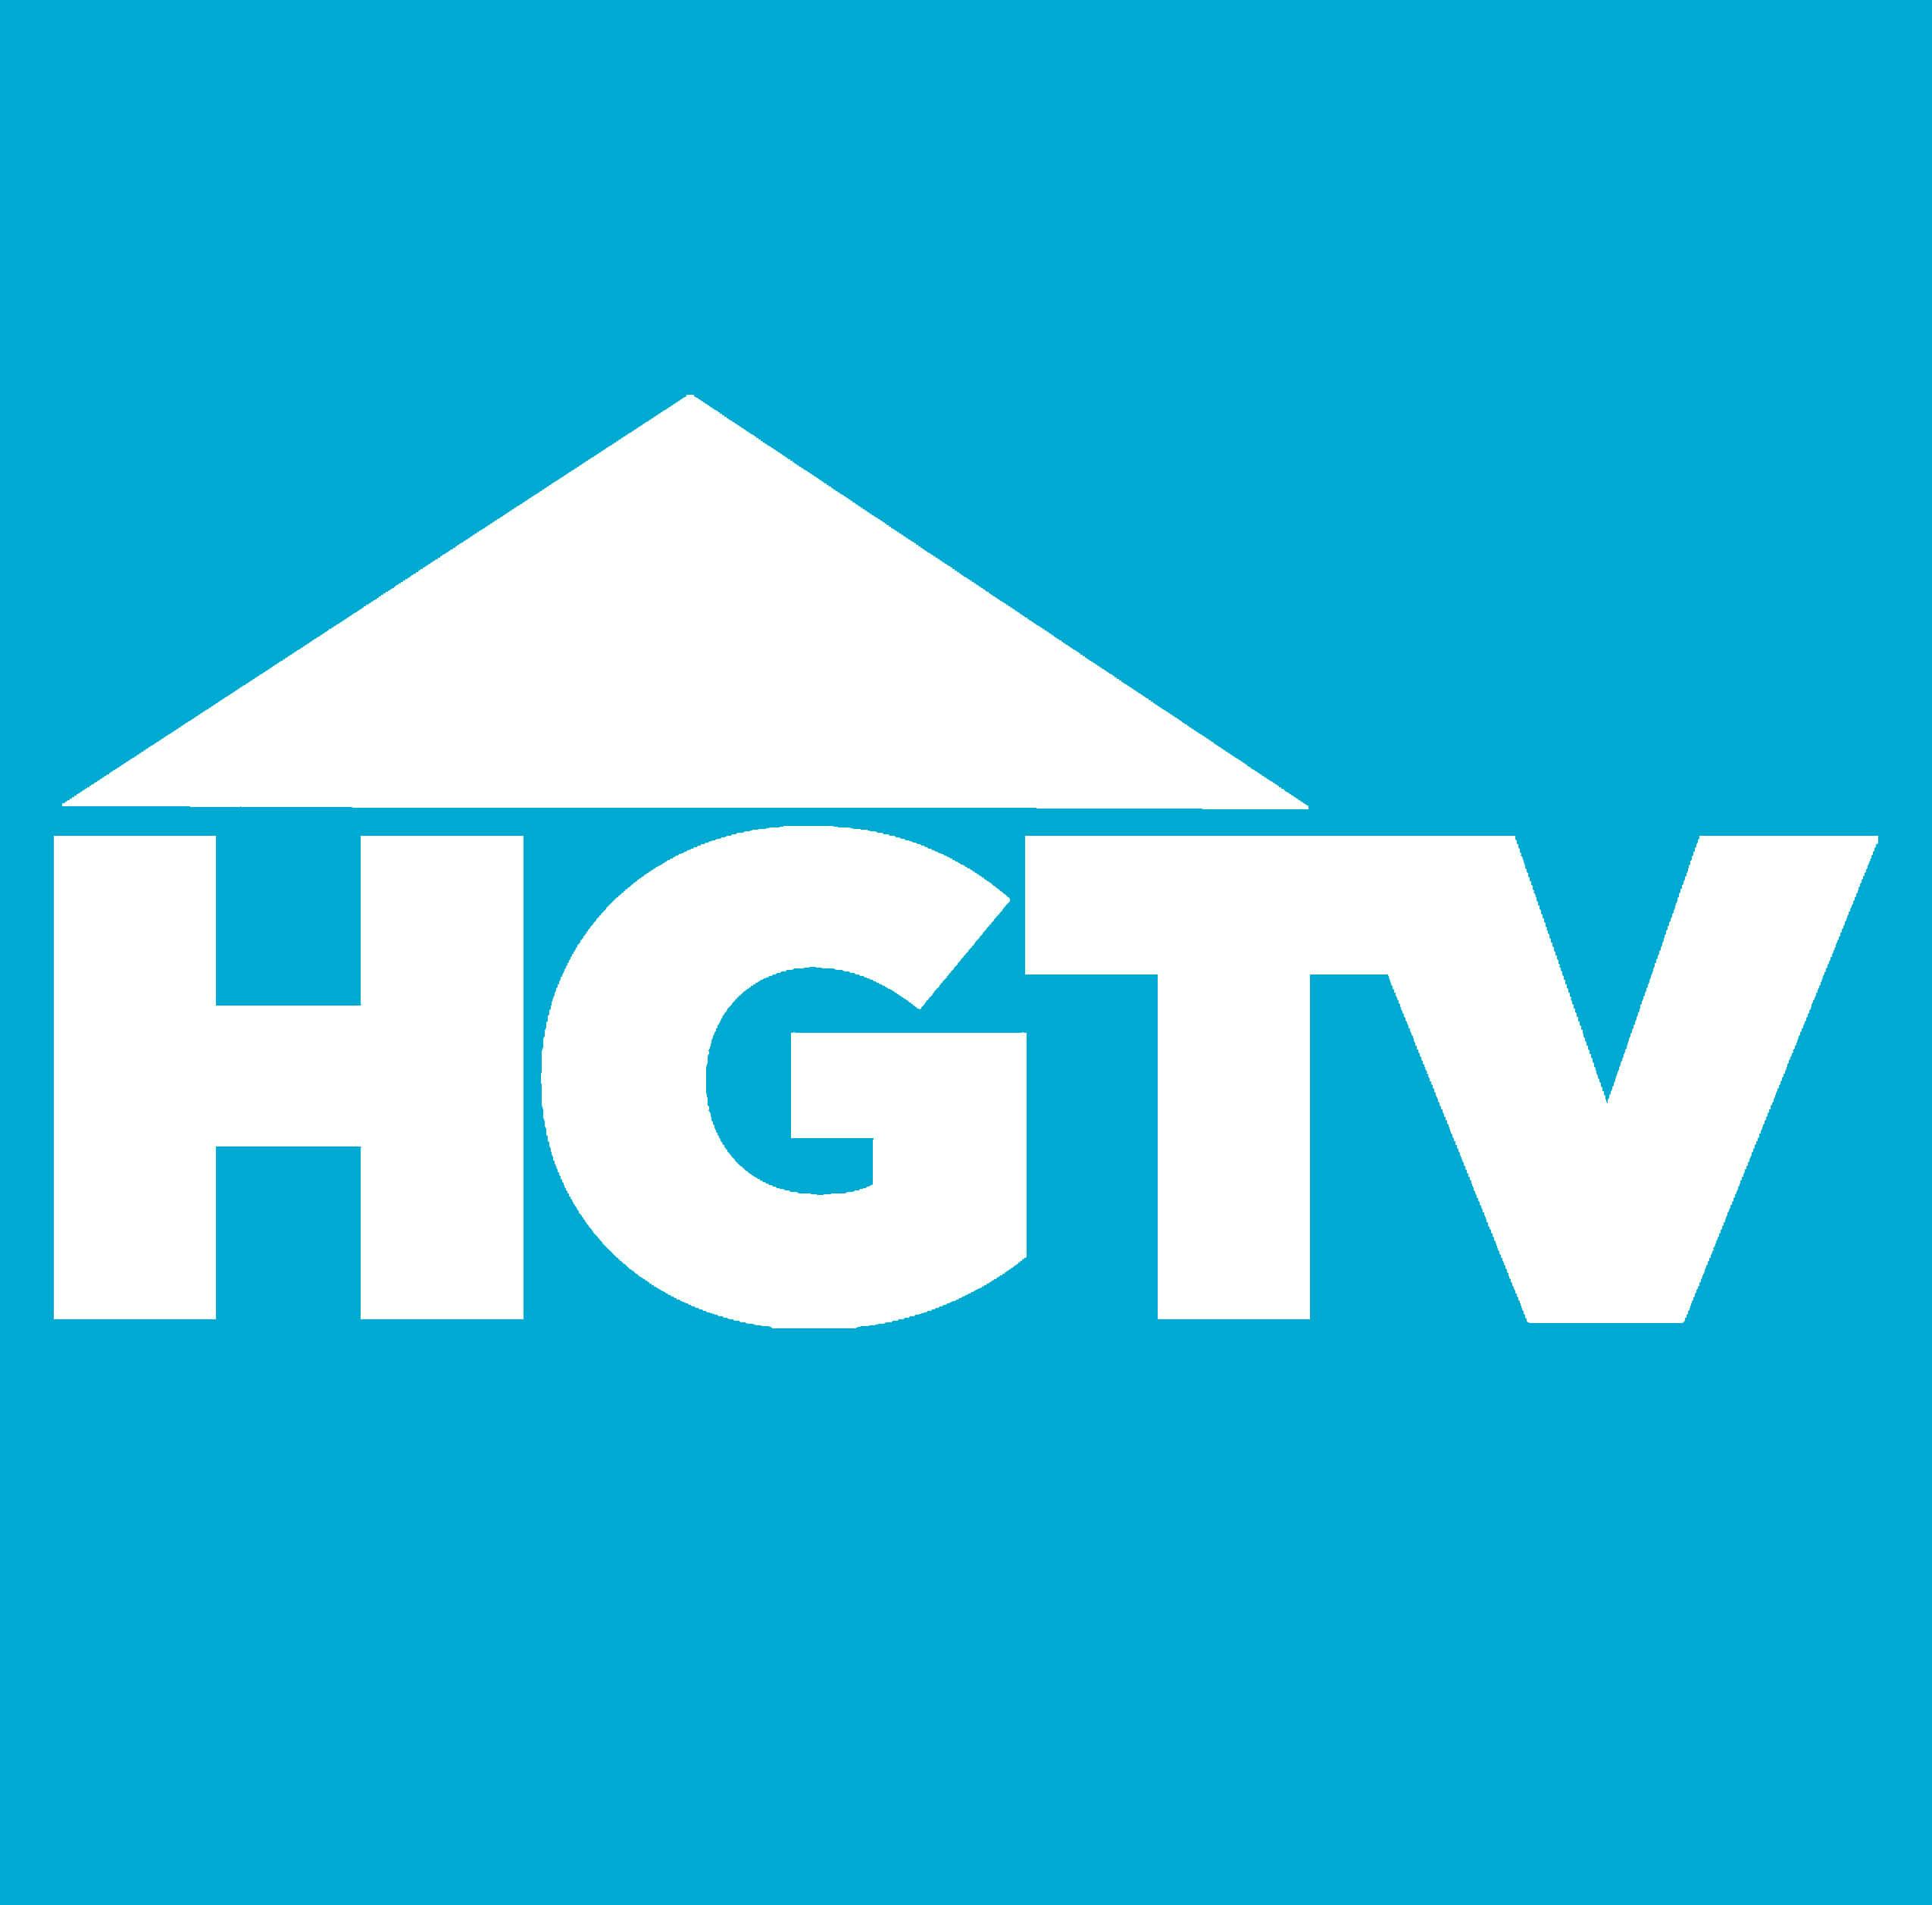 HGTV Live Stream How to Watch HGTV Online for Free